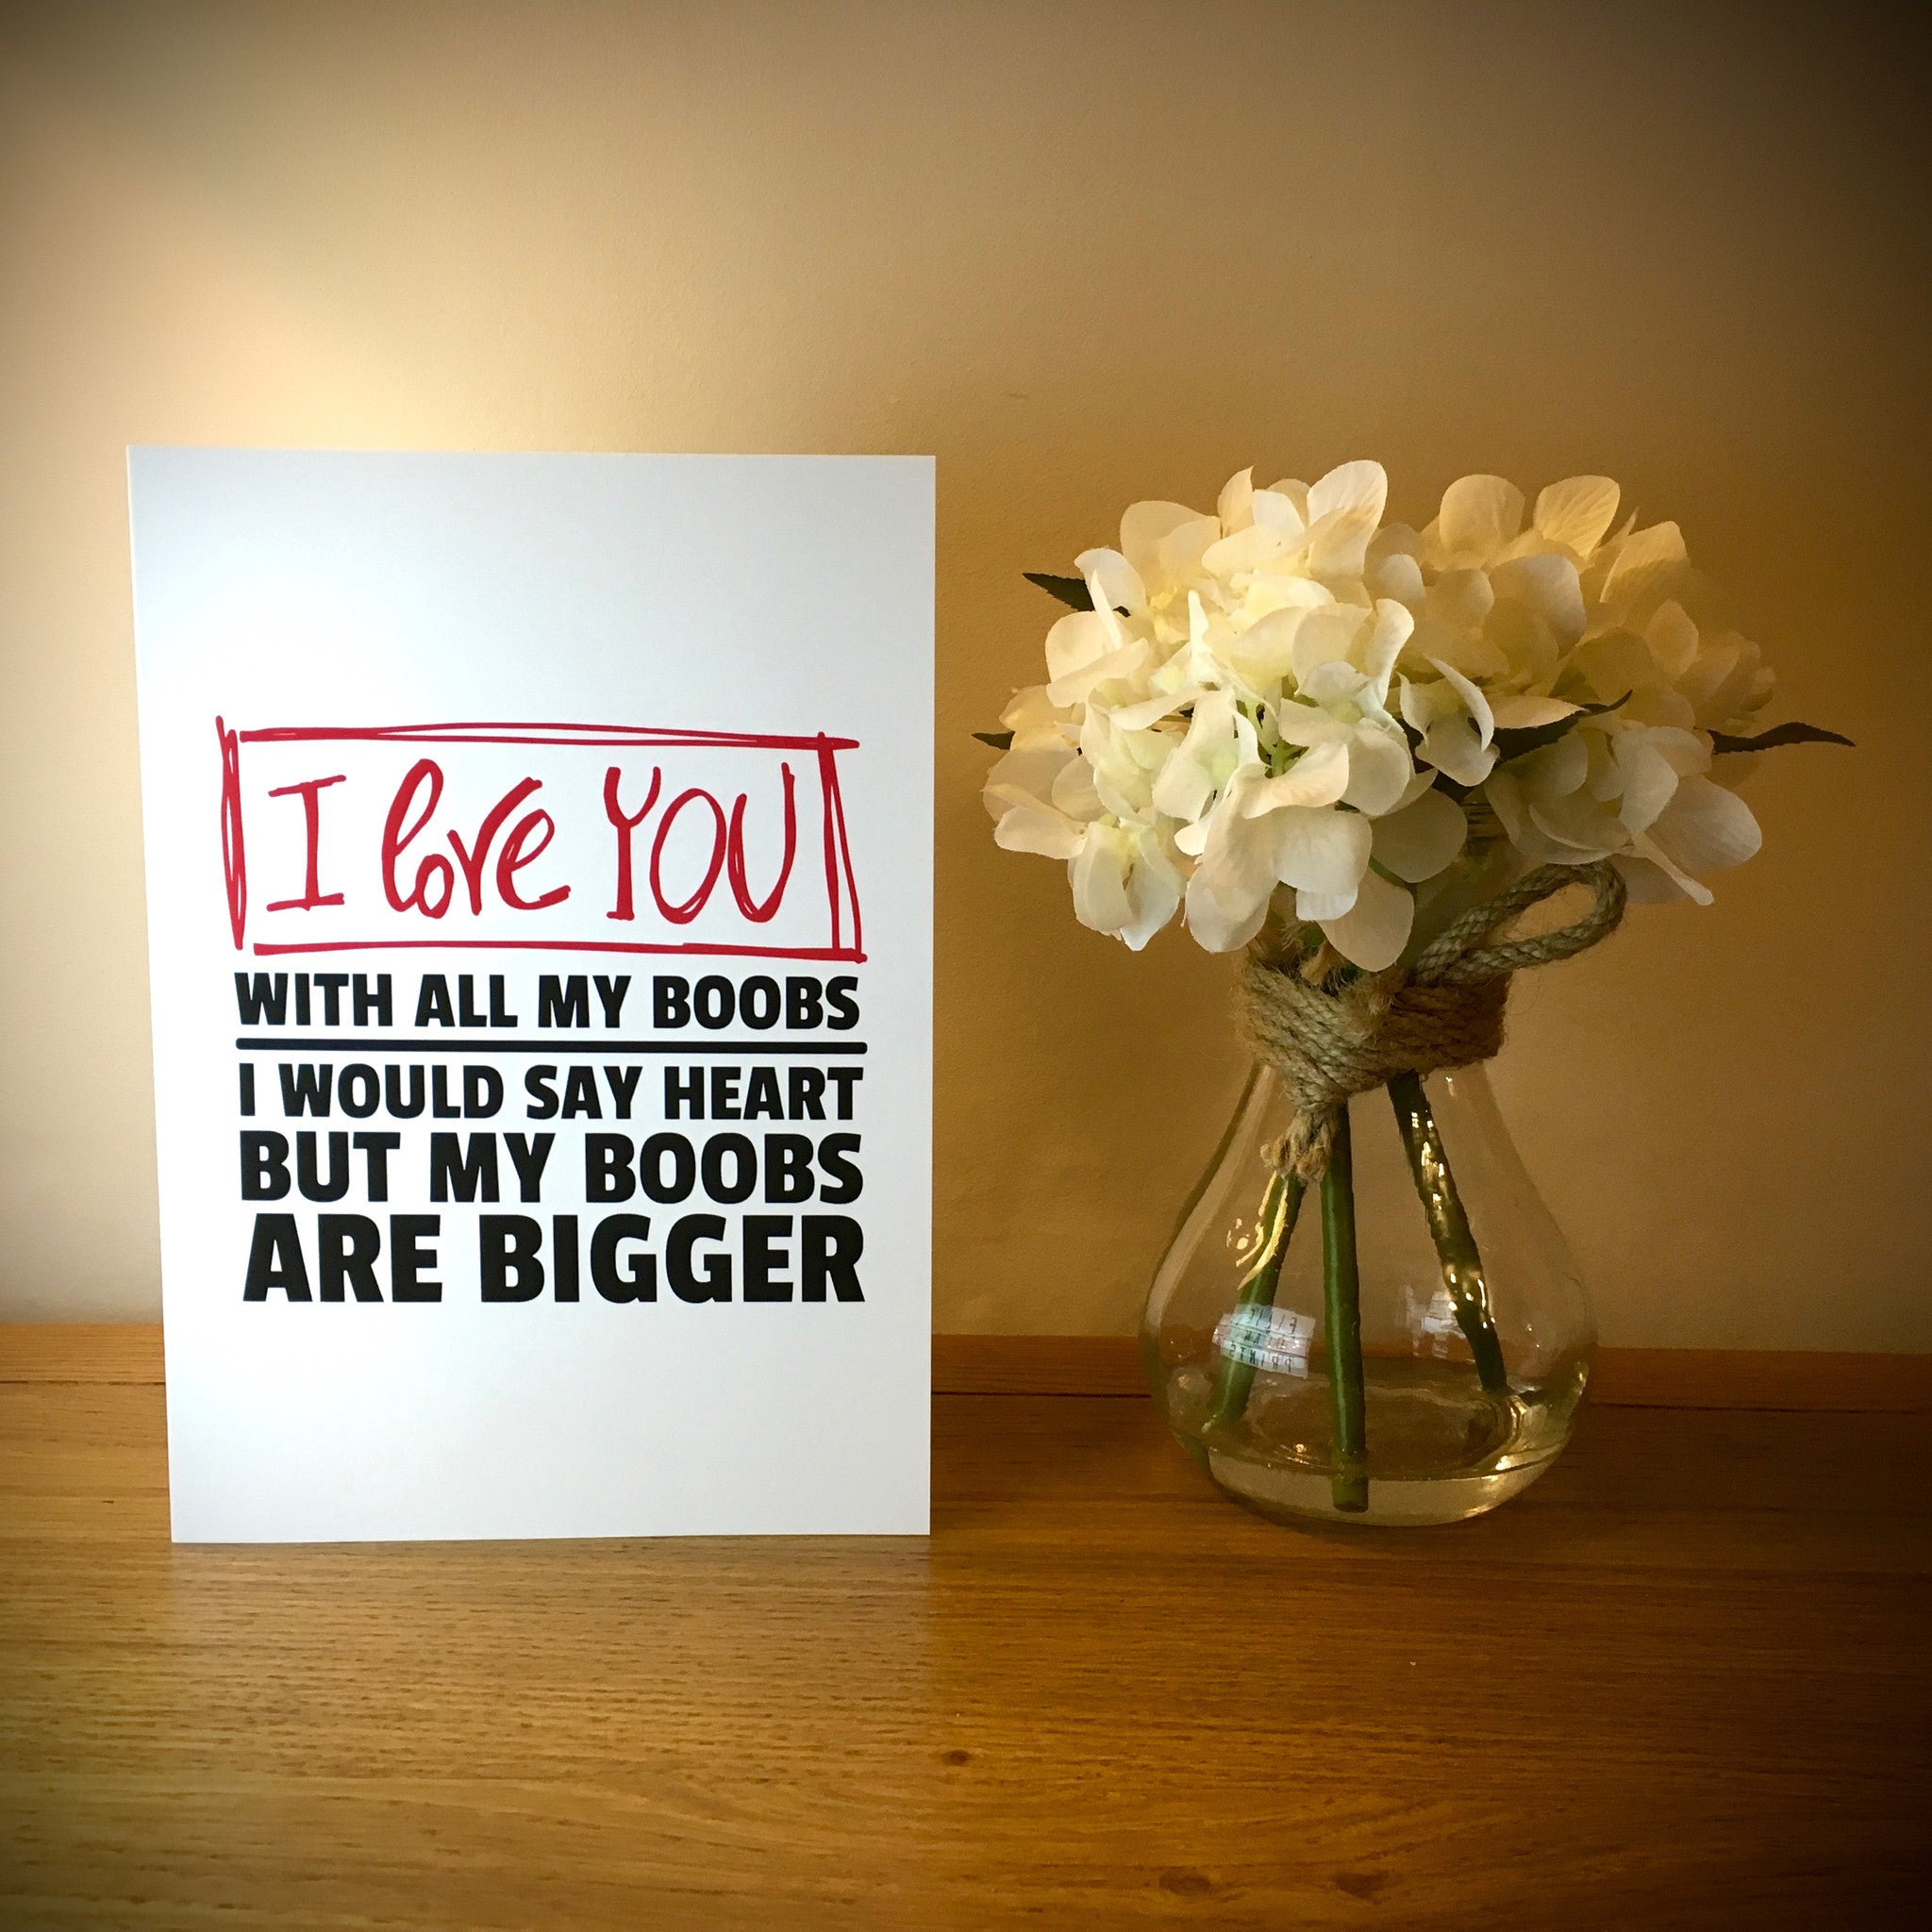 I Love You With All My Boobs Greetings Card - EllieBeanPrints